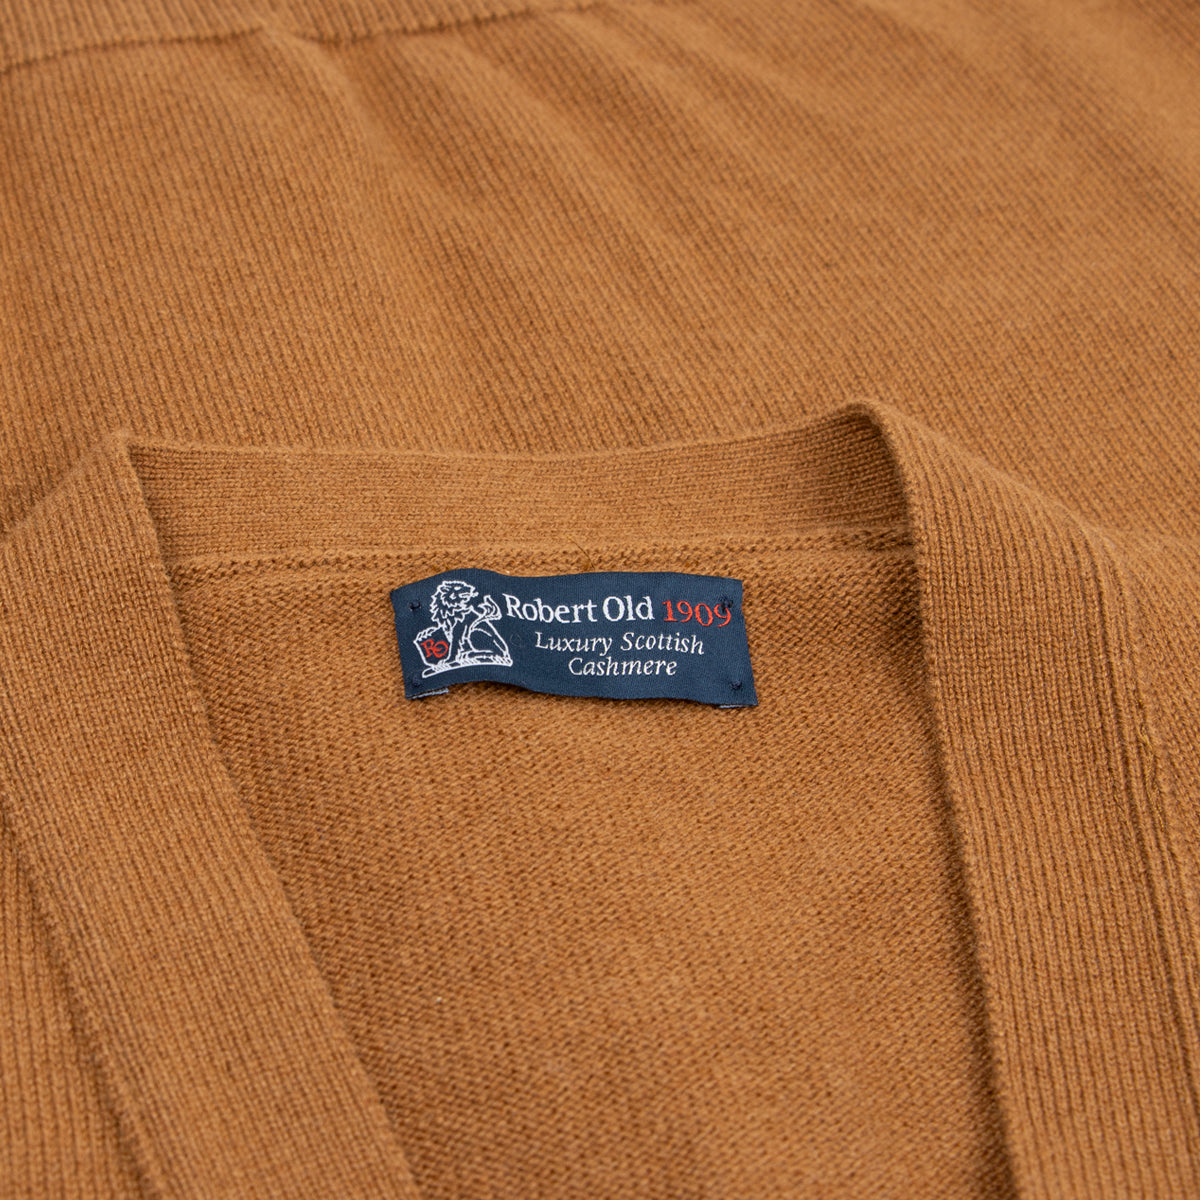 Vintage Vicuna Mallaig 4ply Cashmere Cardigan  Robert Old   